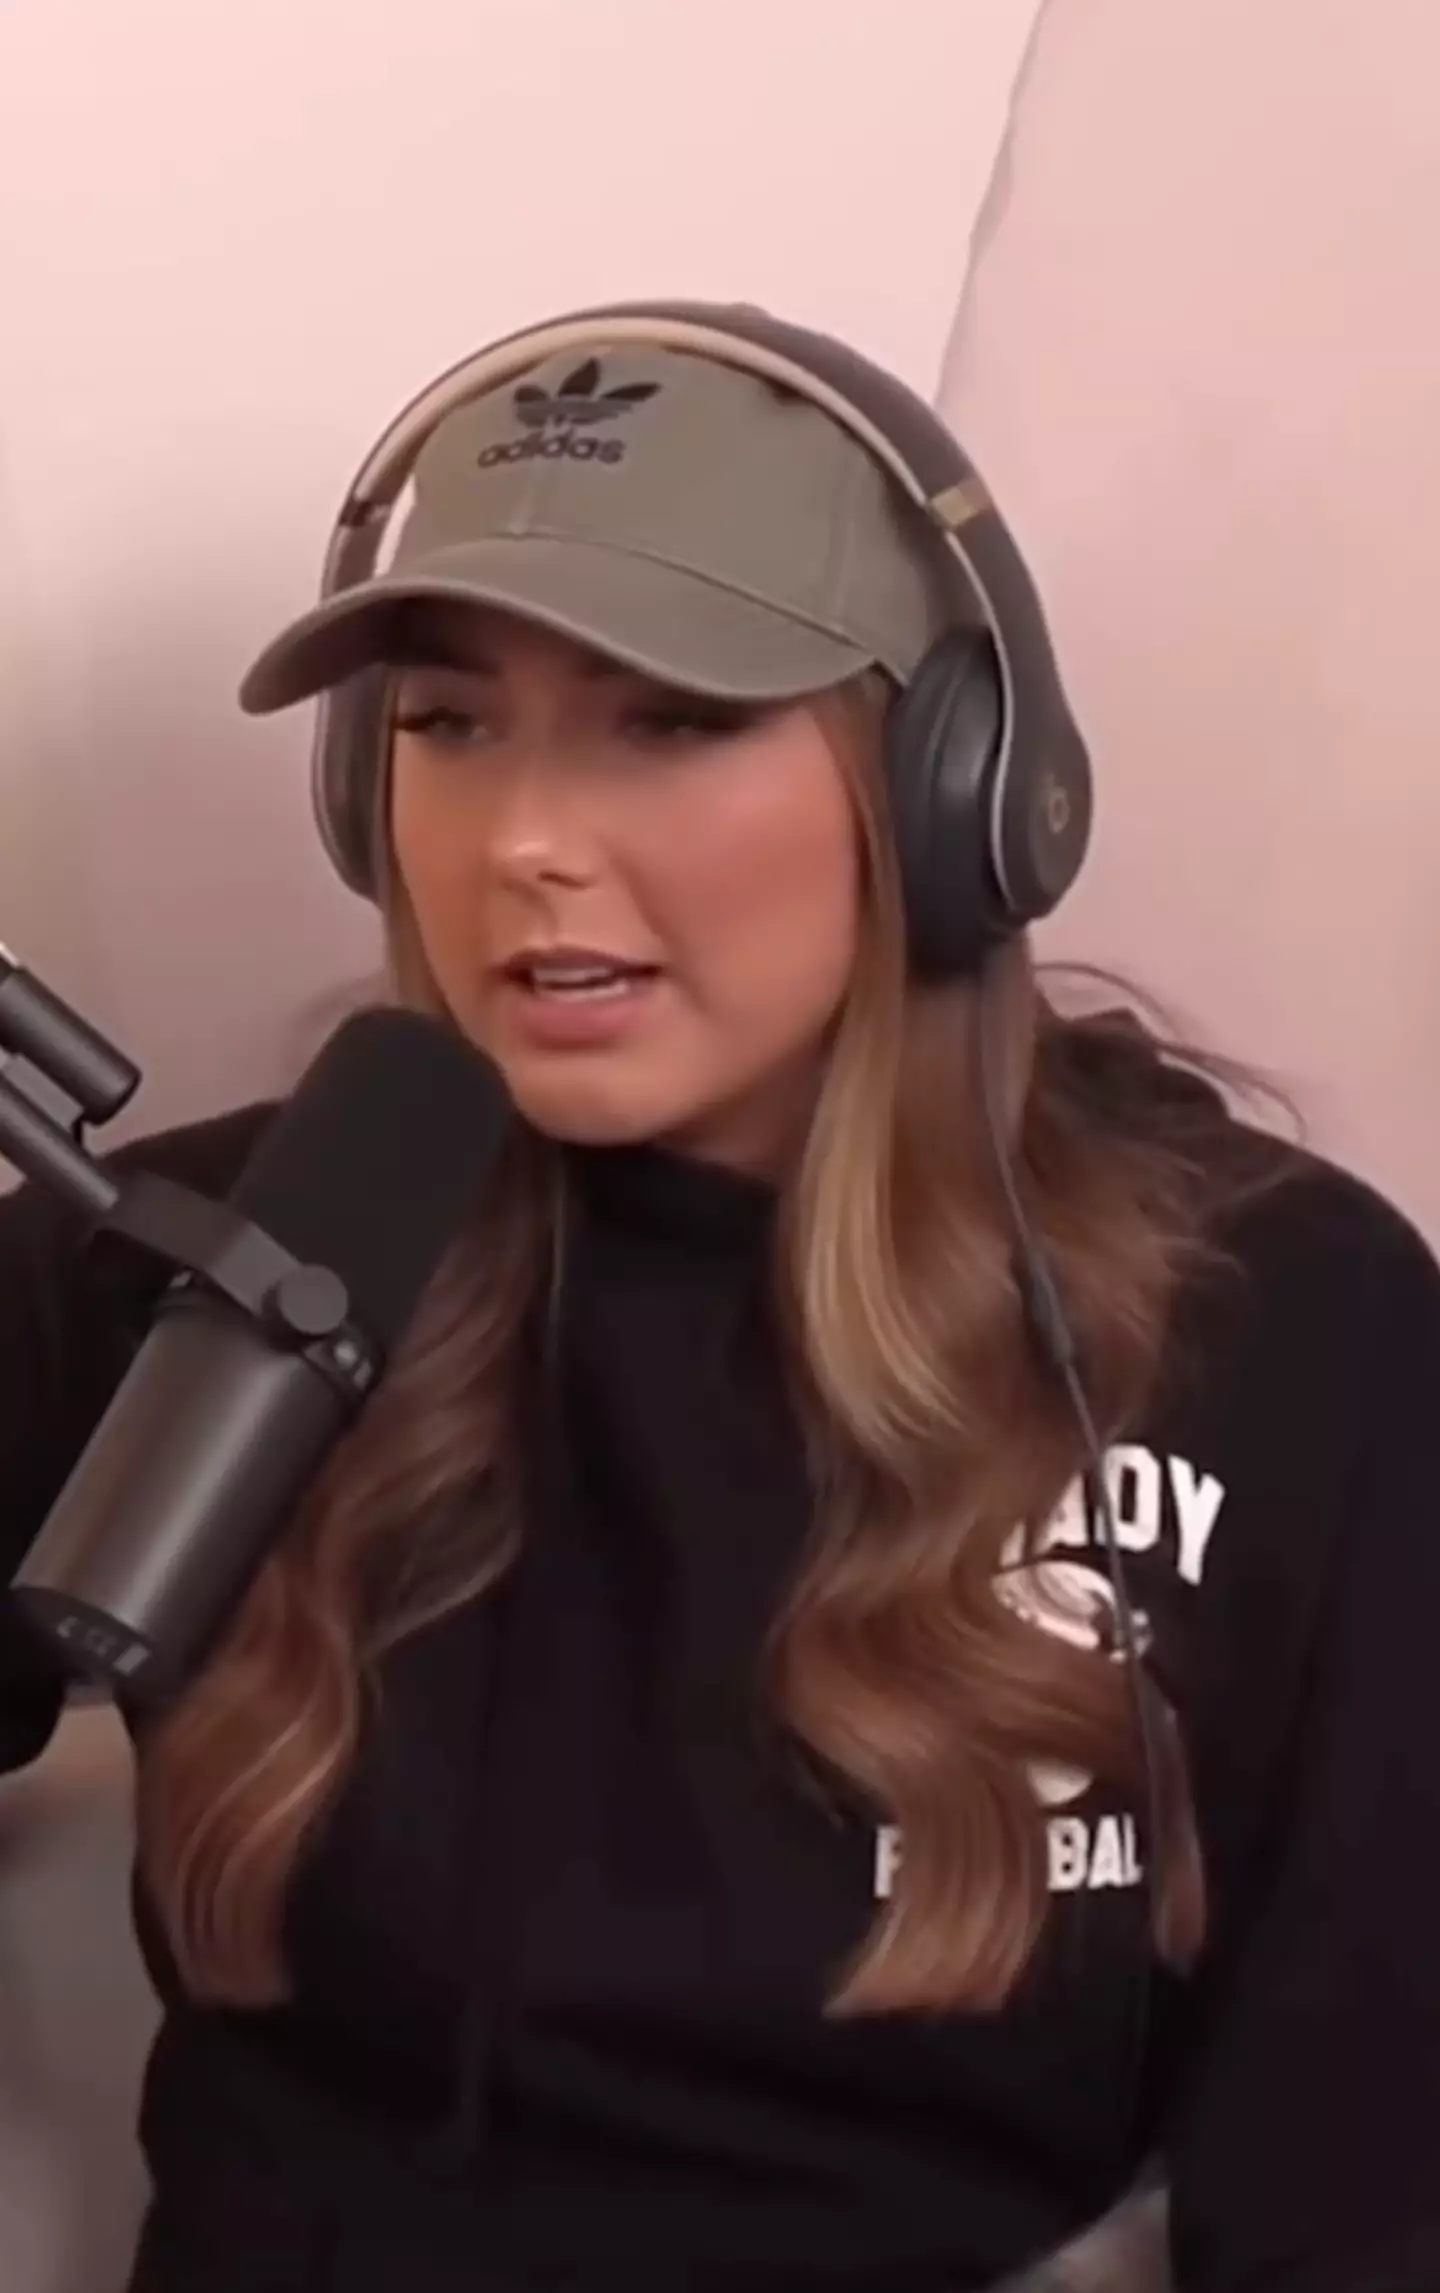 Hailie Jade opened up about what it was like constantly being asked about her dad Eminem.